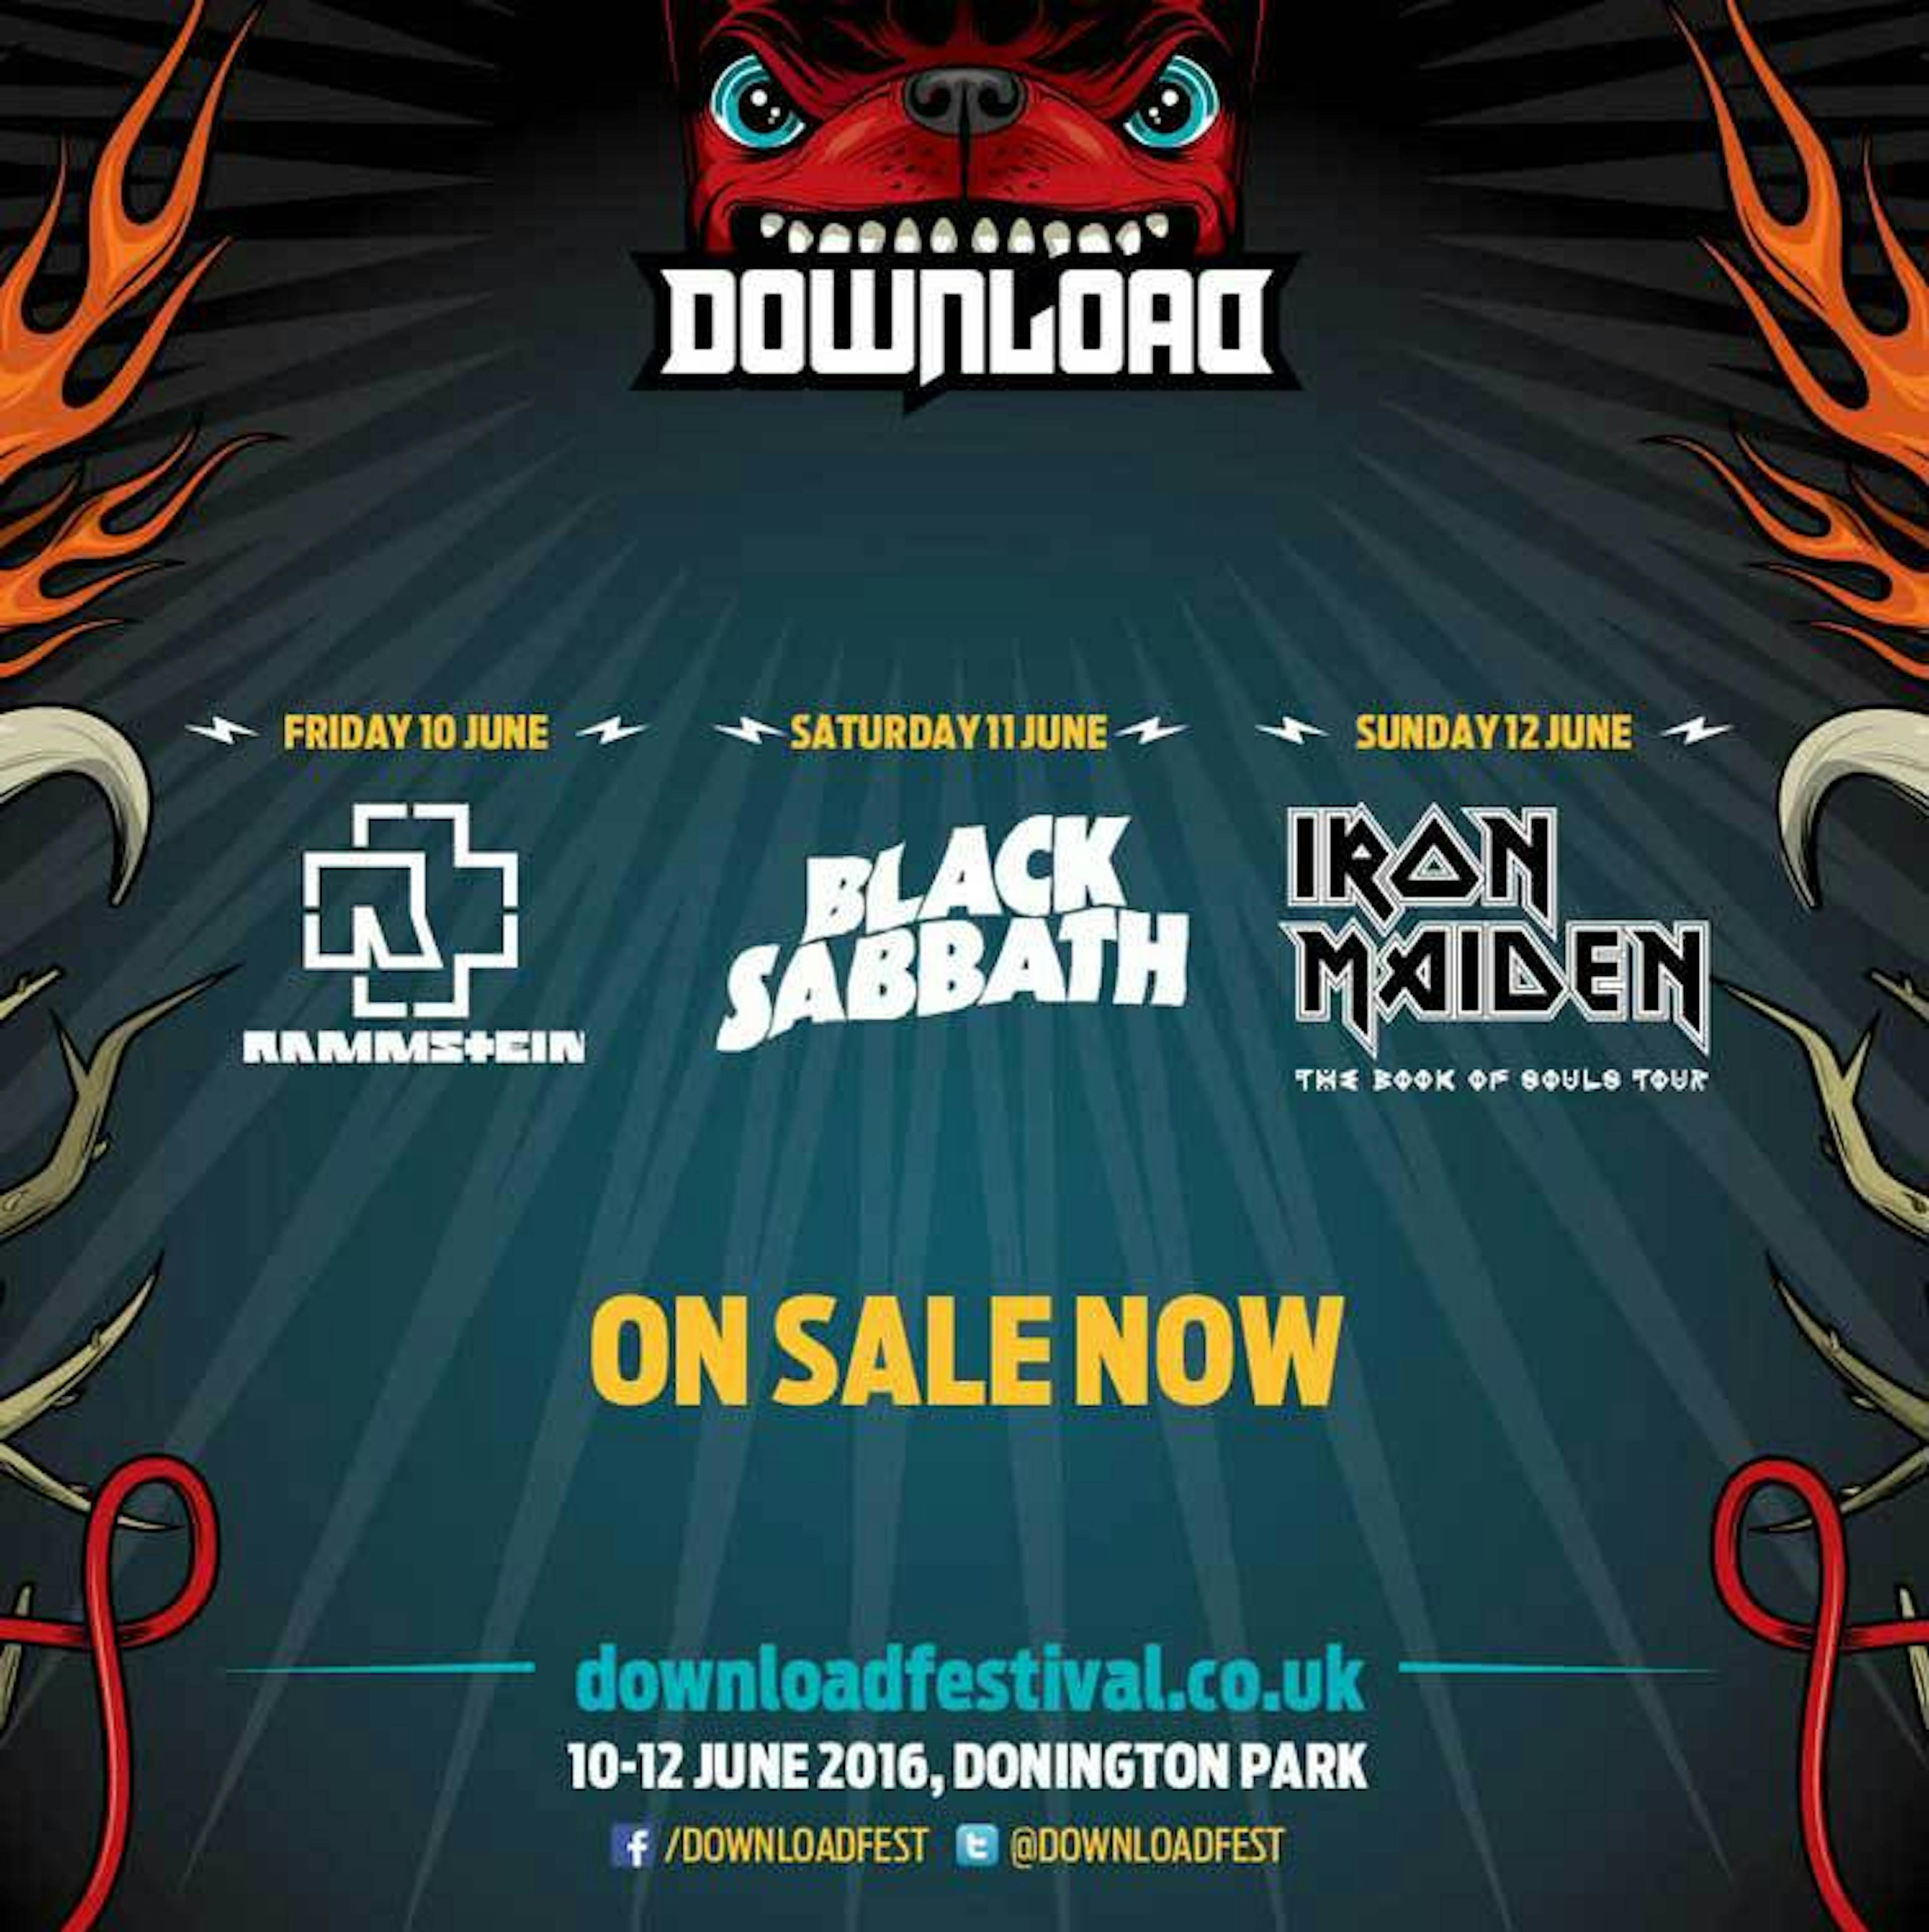 Download Festival 2016 Tickets On Sale Now